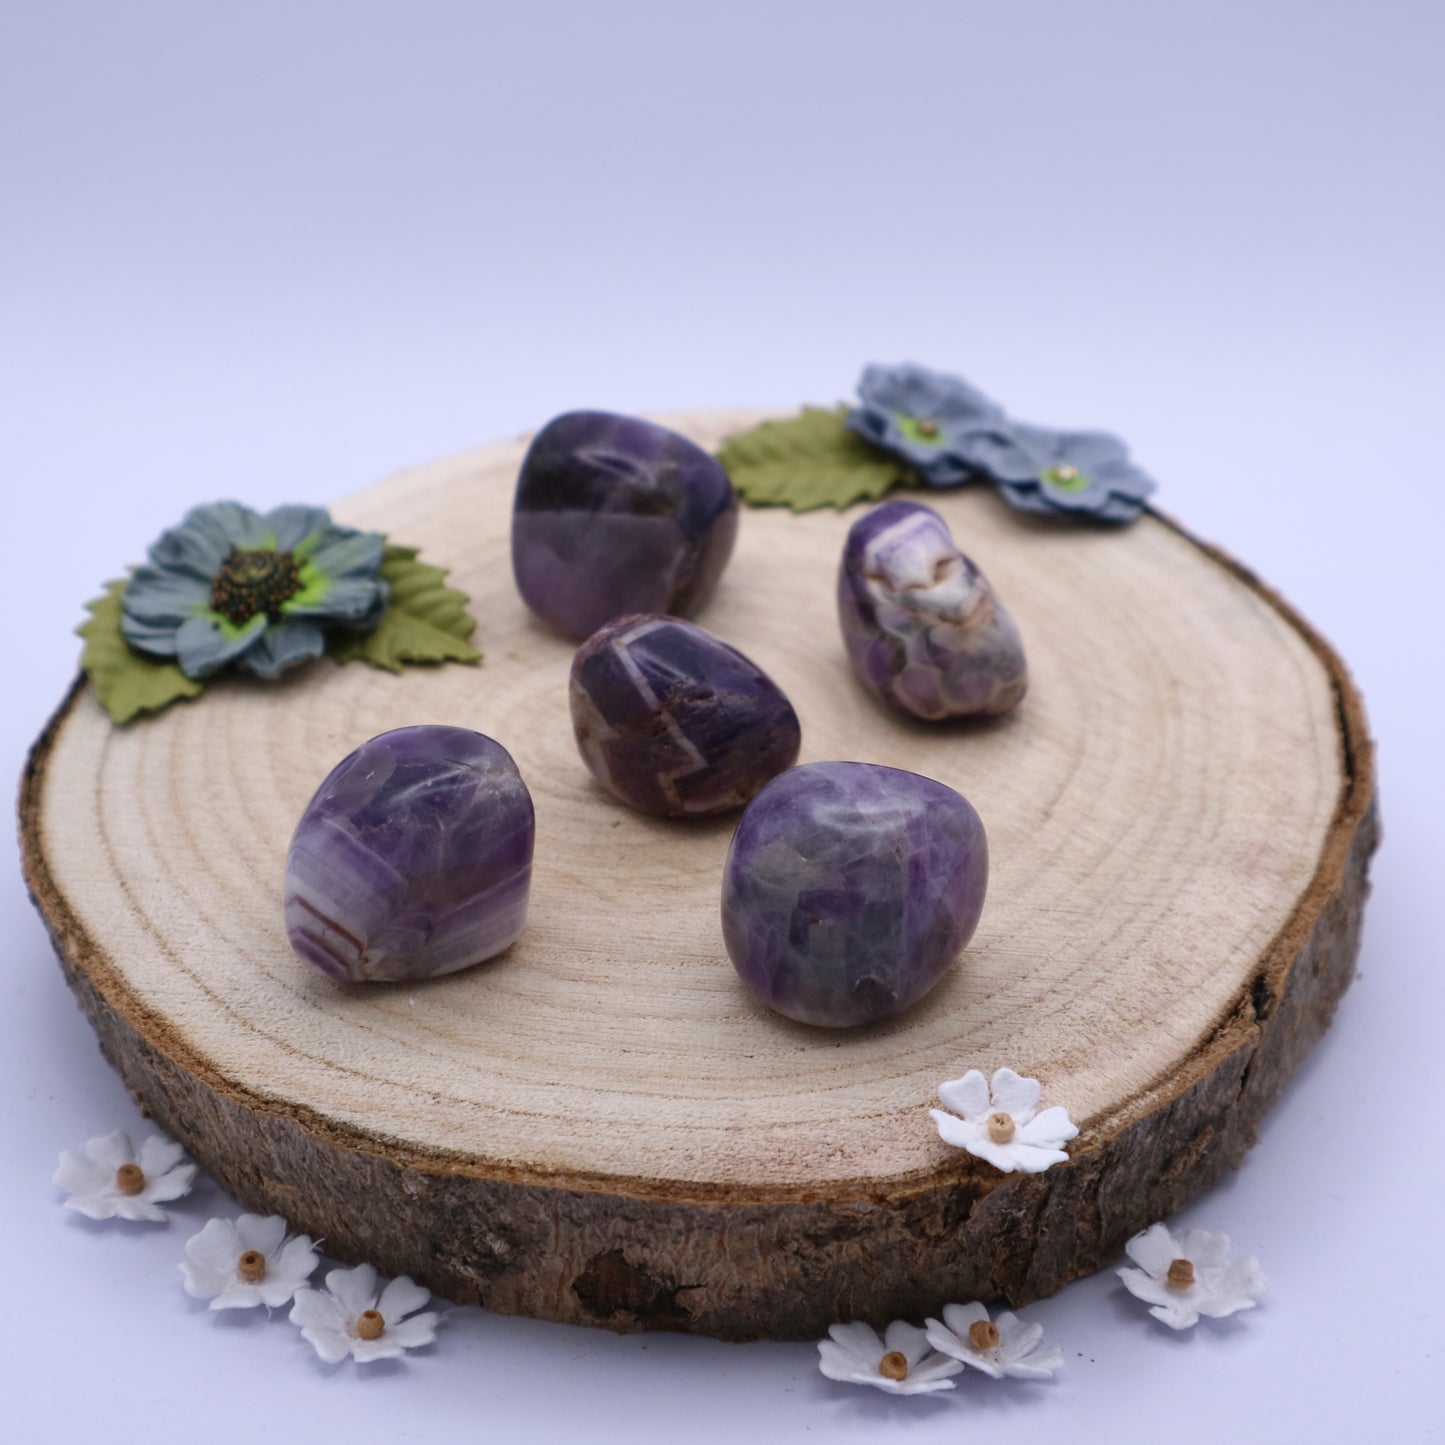 Five pieces of Amethyst crystals displayed on a piece of wood surrounded by flowers